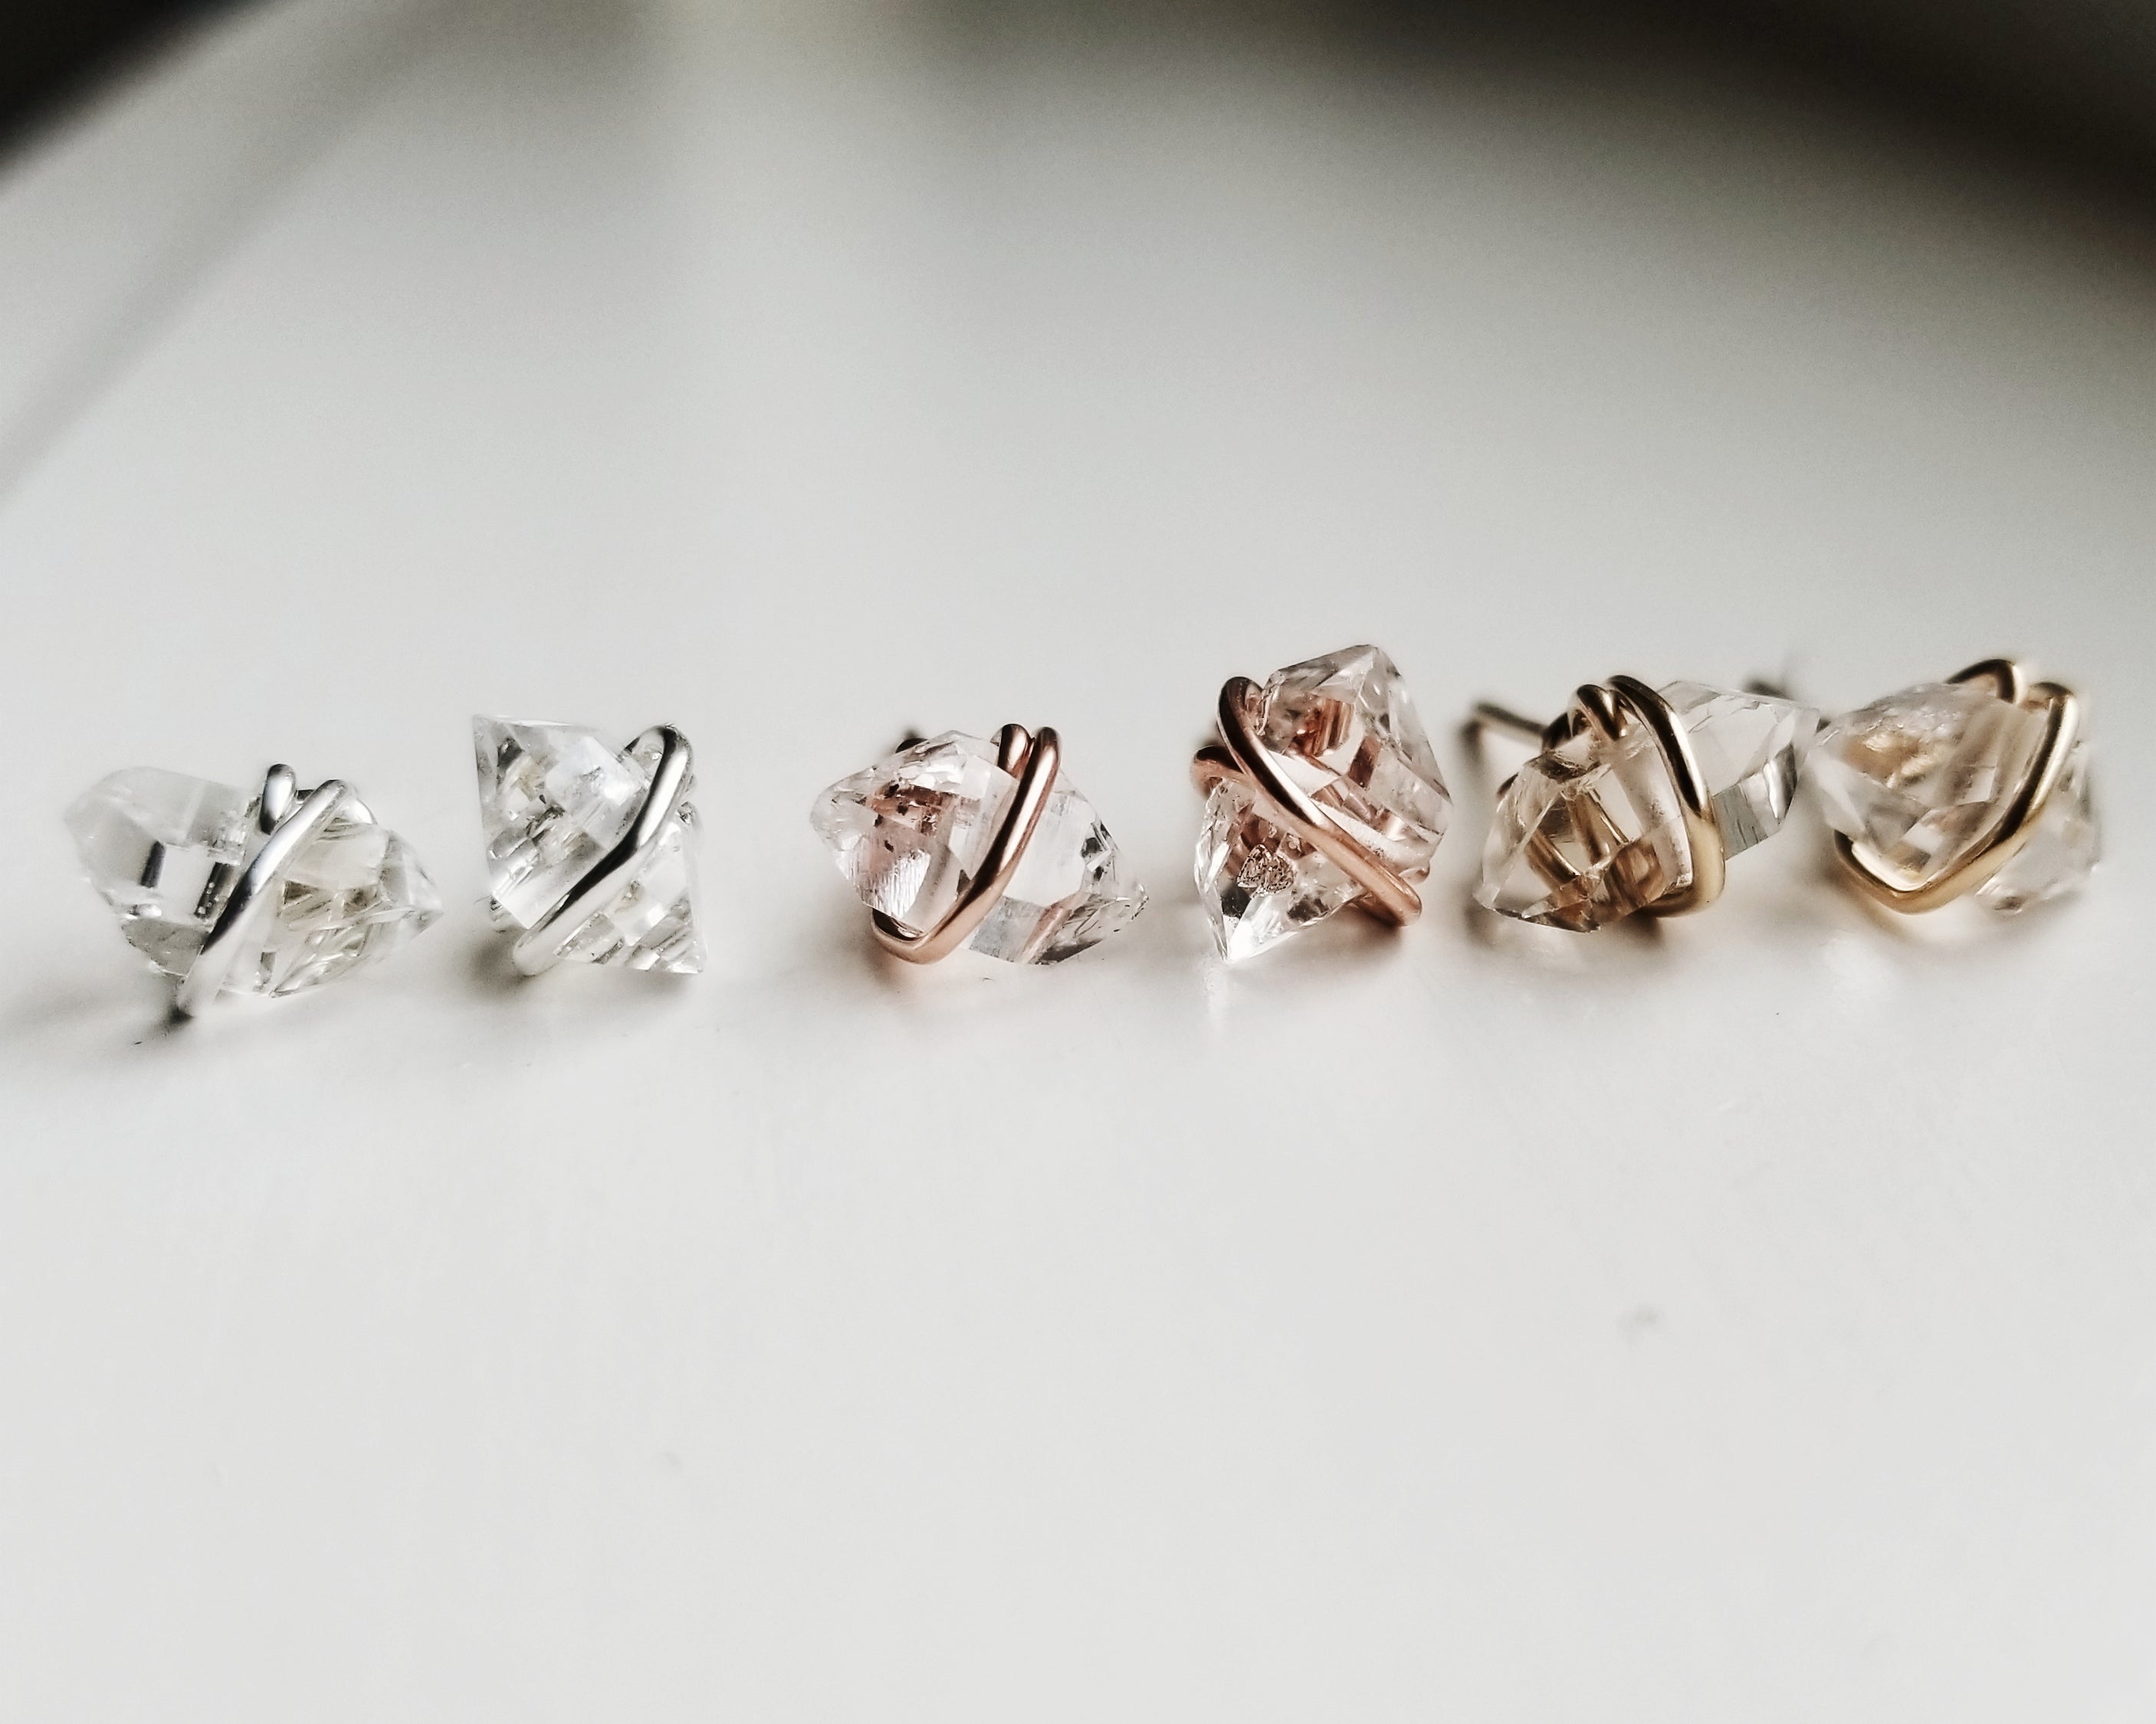 a trio of sets of herkimer diamond earrings in silver, rose gold and gold on a white background